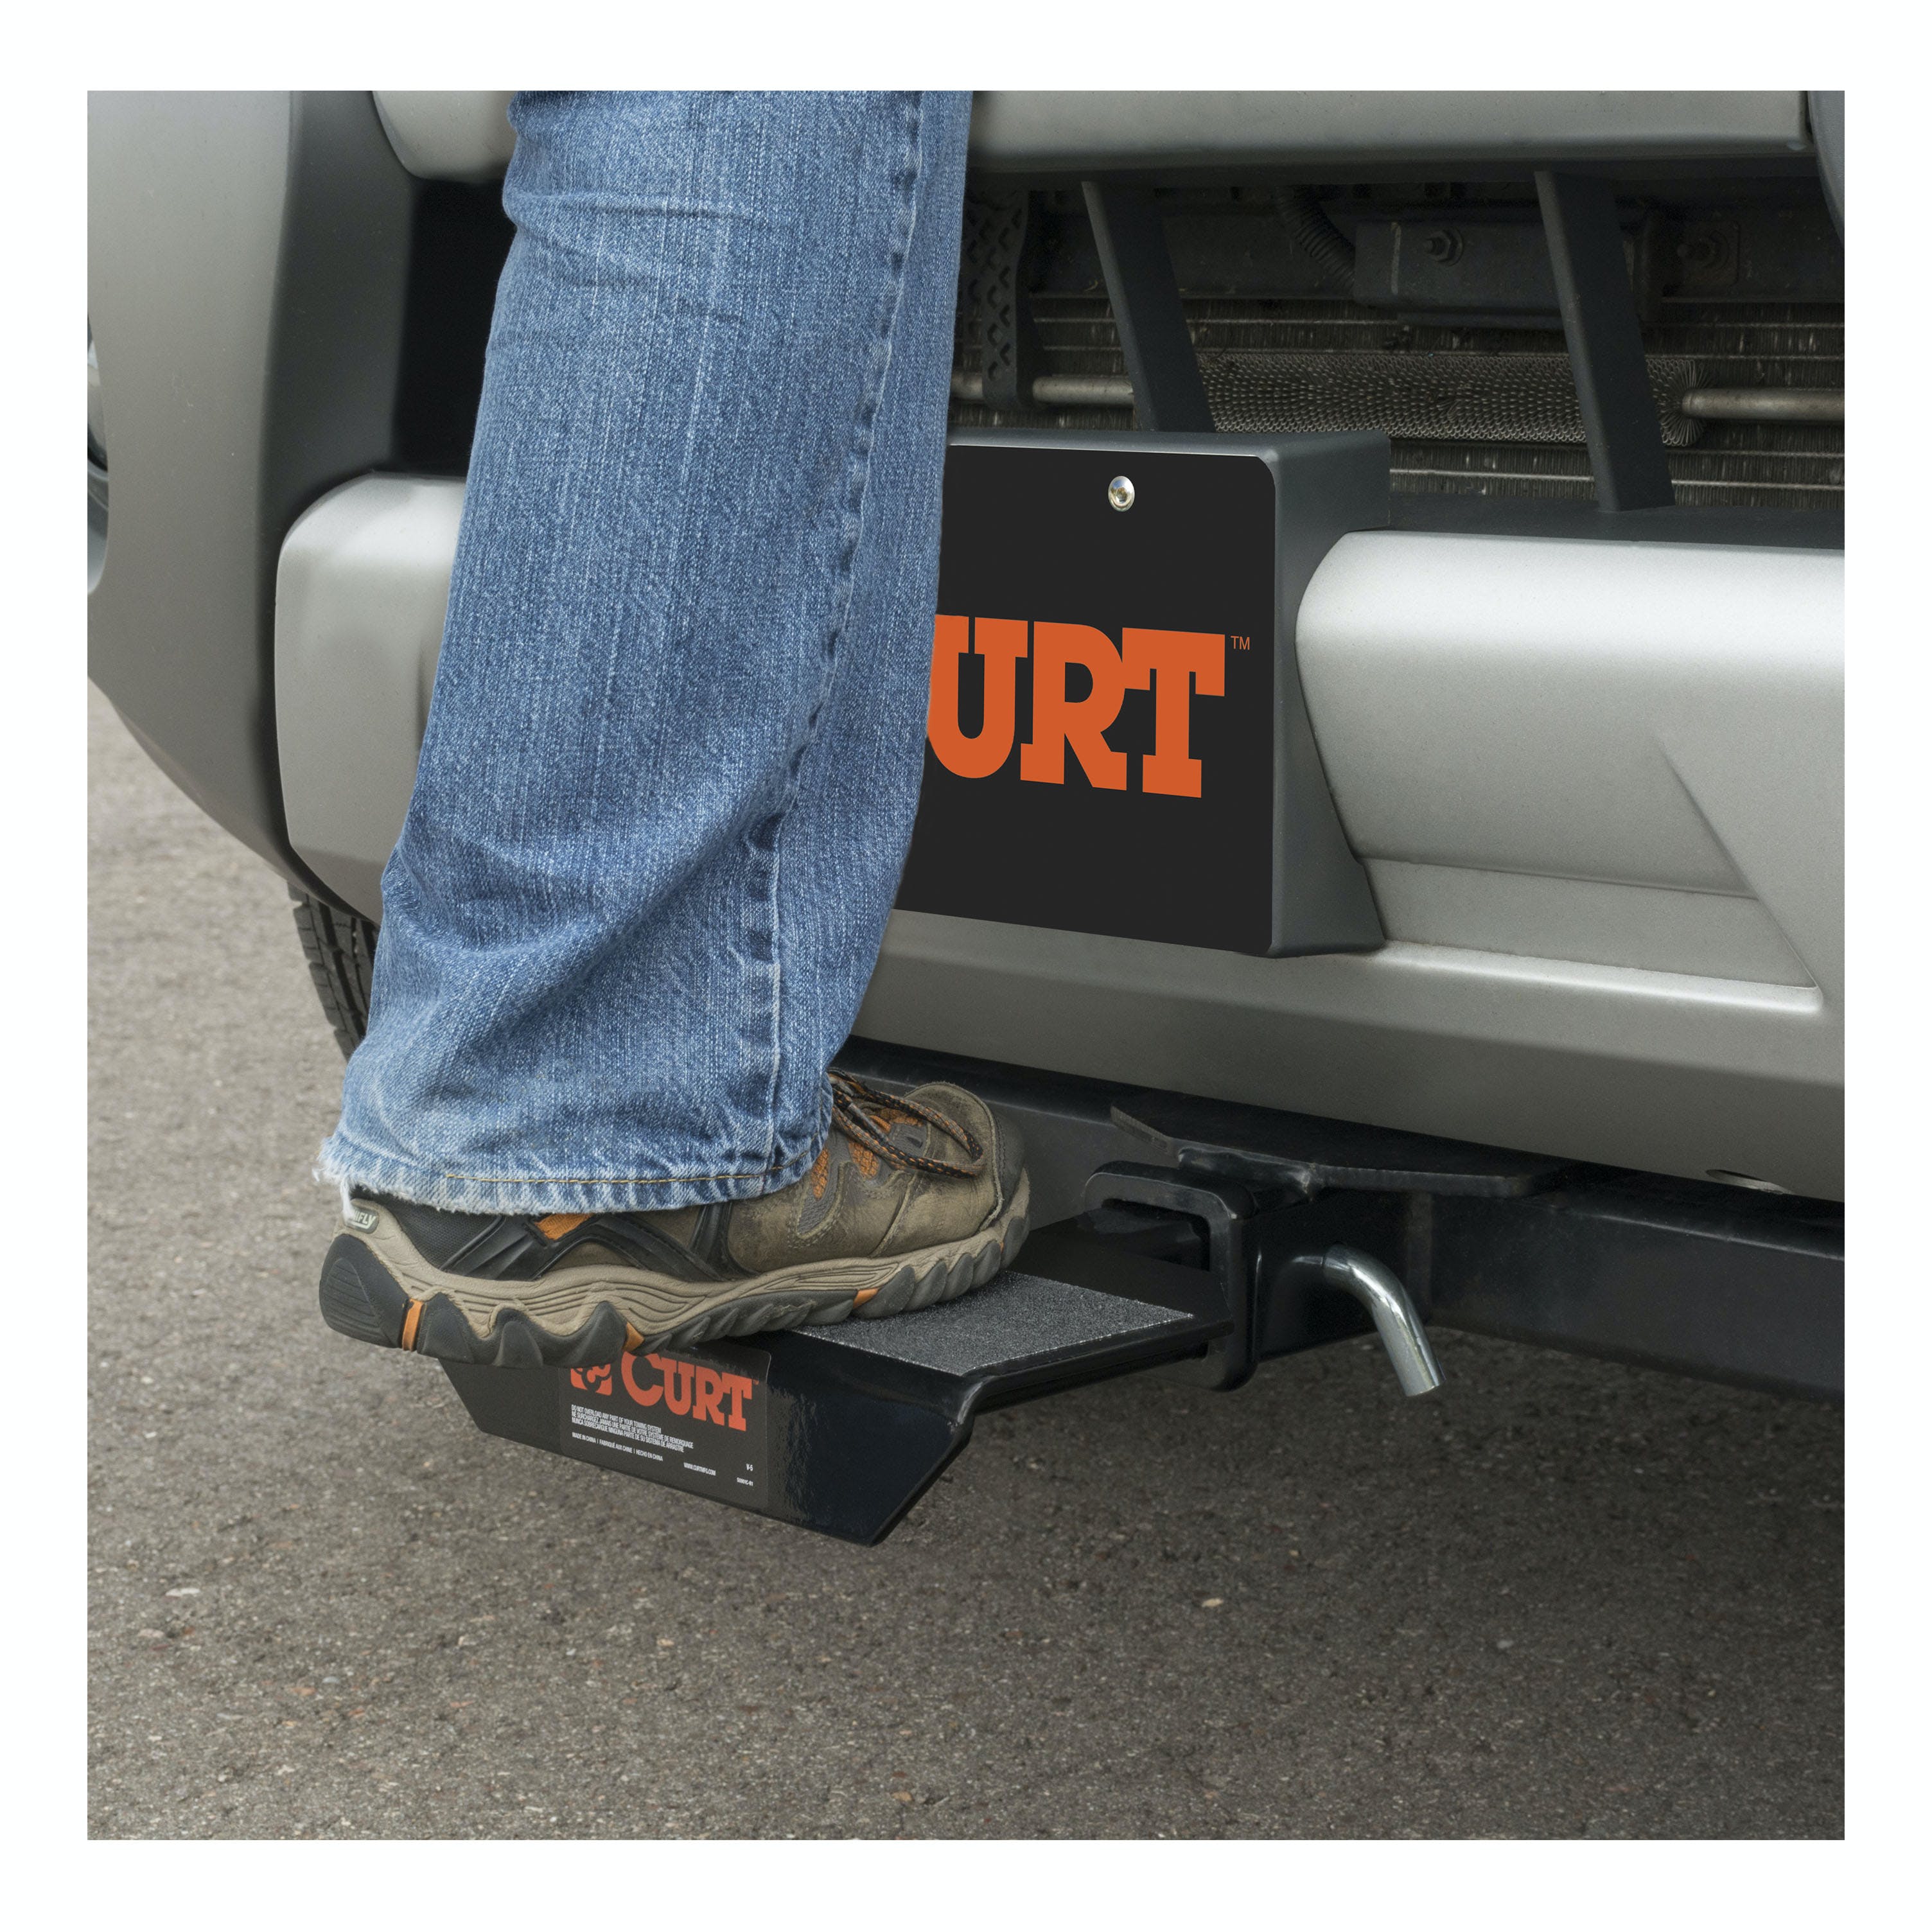 CURT 31001 Hitch-Mounted Step Pad (Fits 2 Receiver)